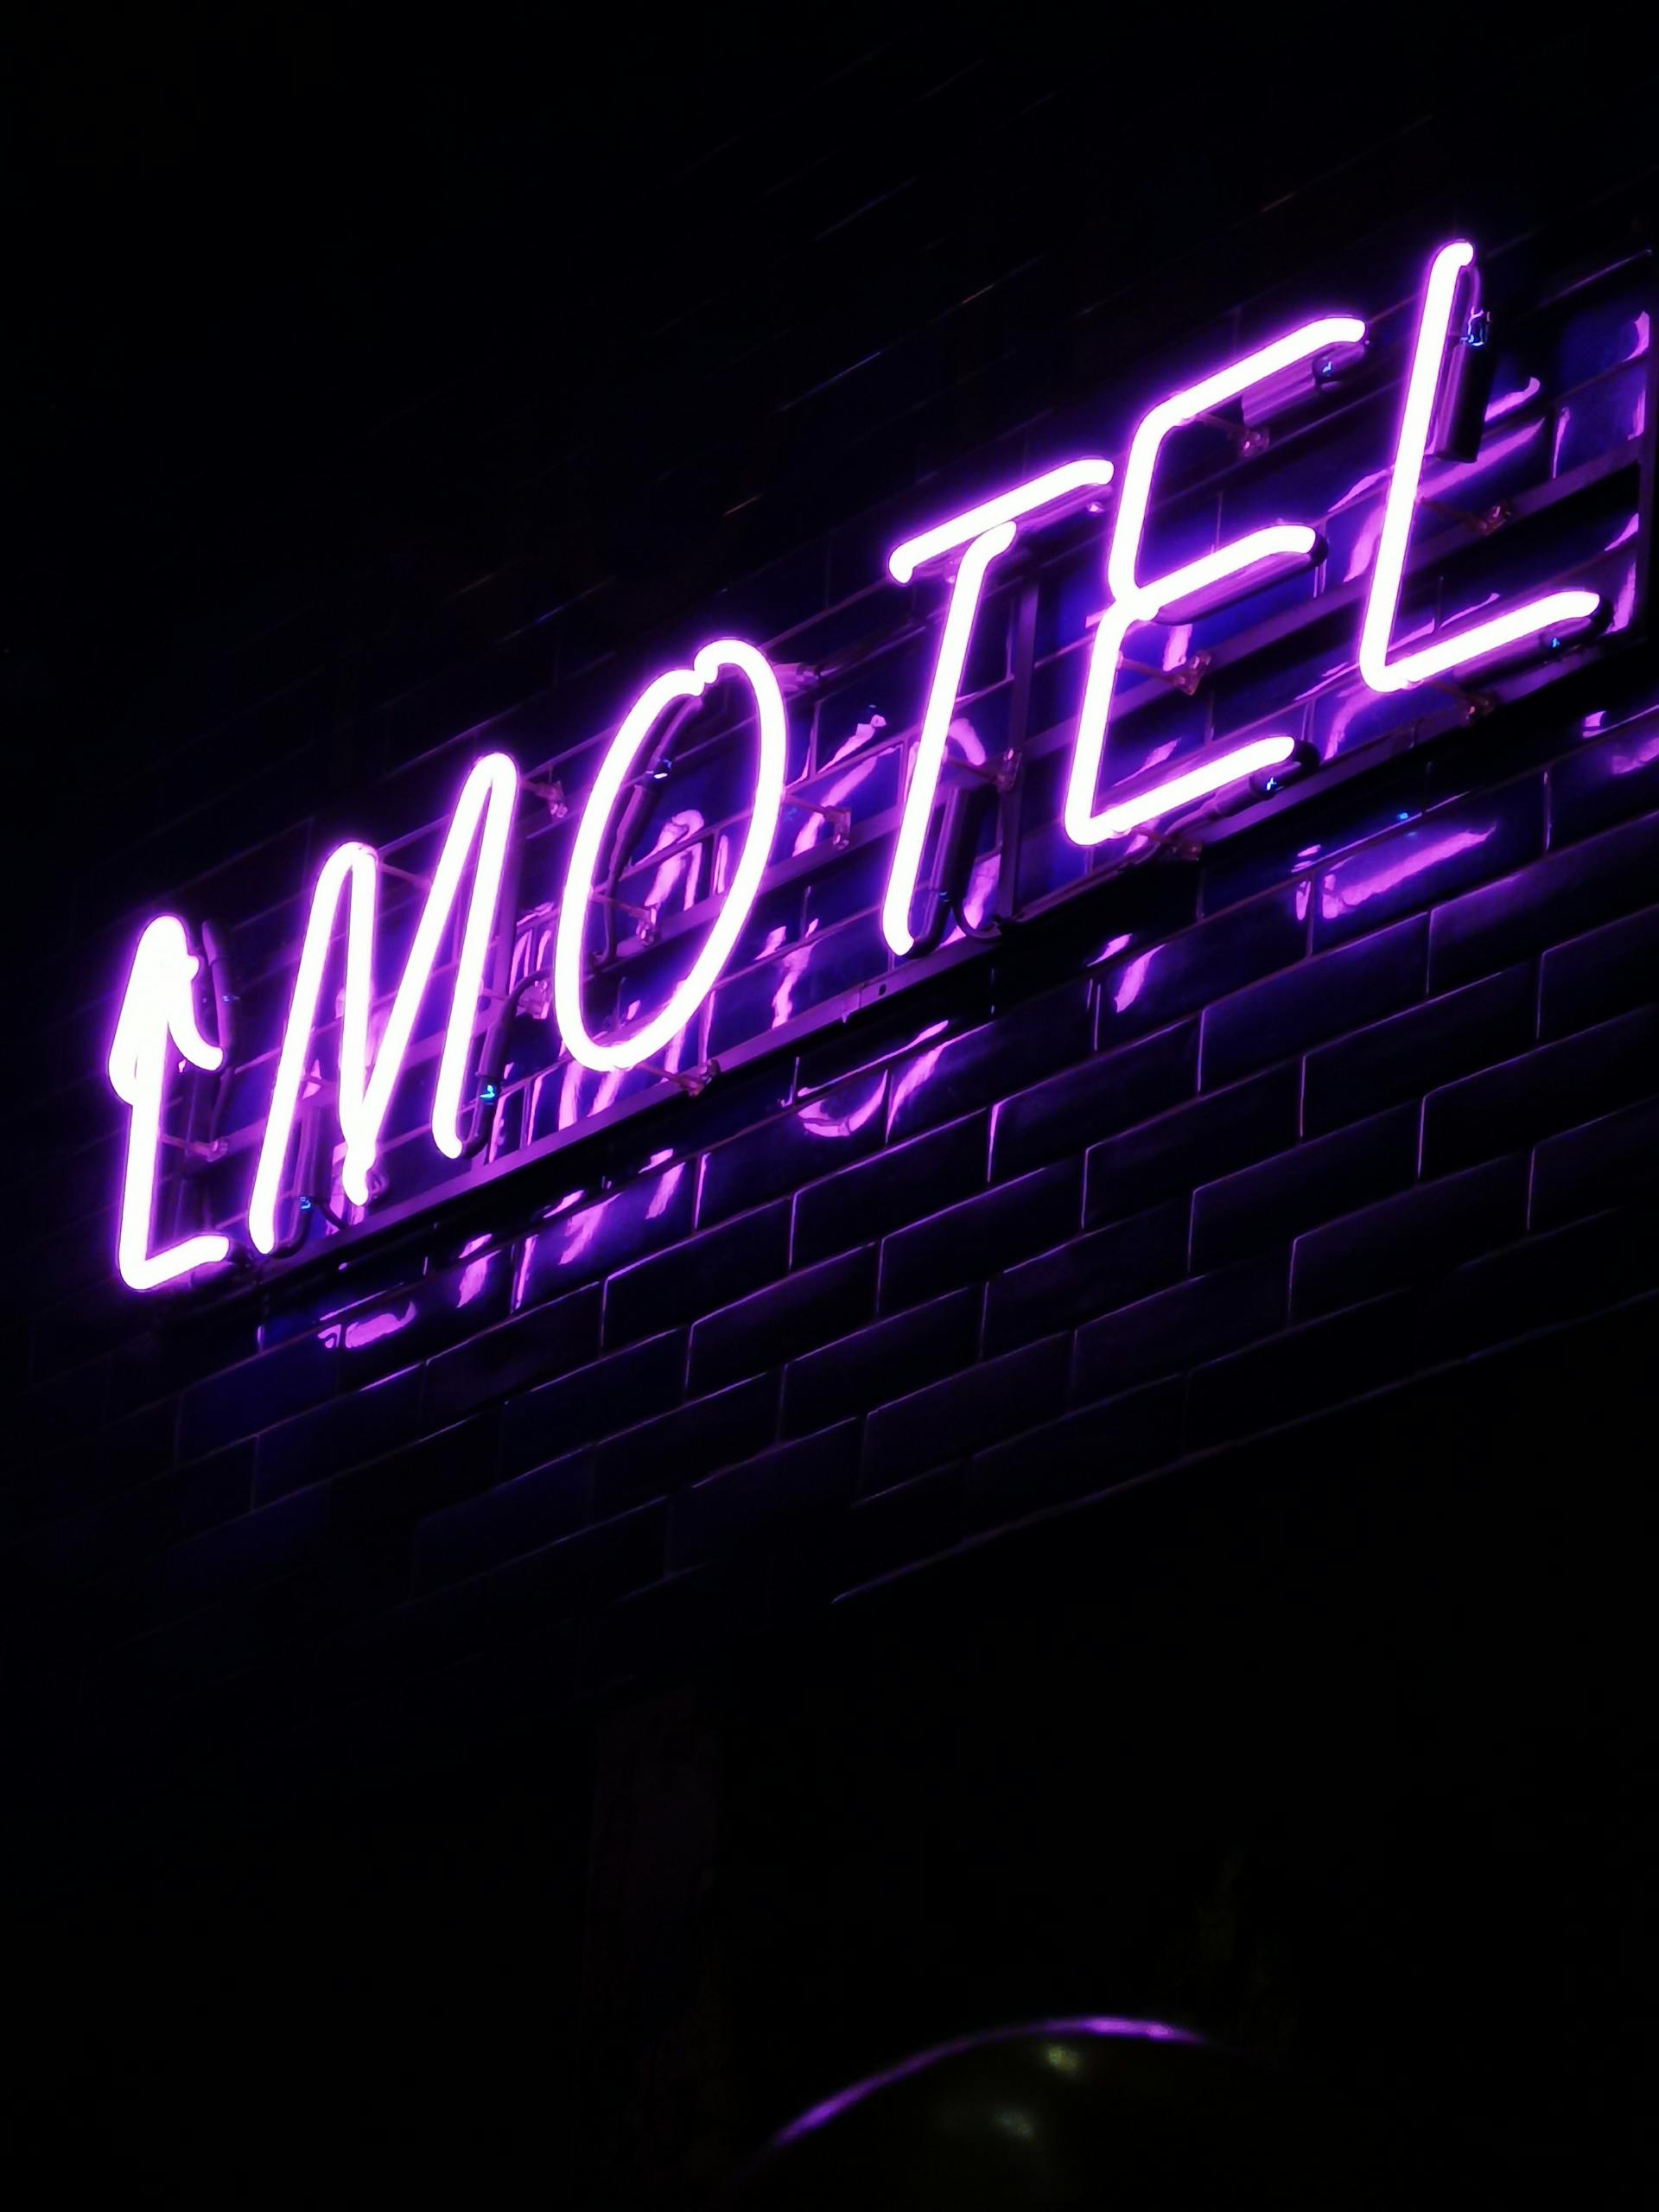 A neon sign of a motel | Source: Pexels